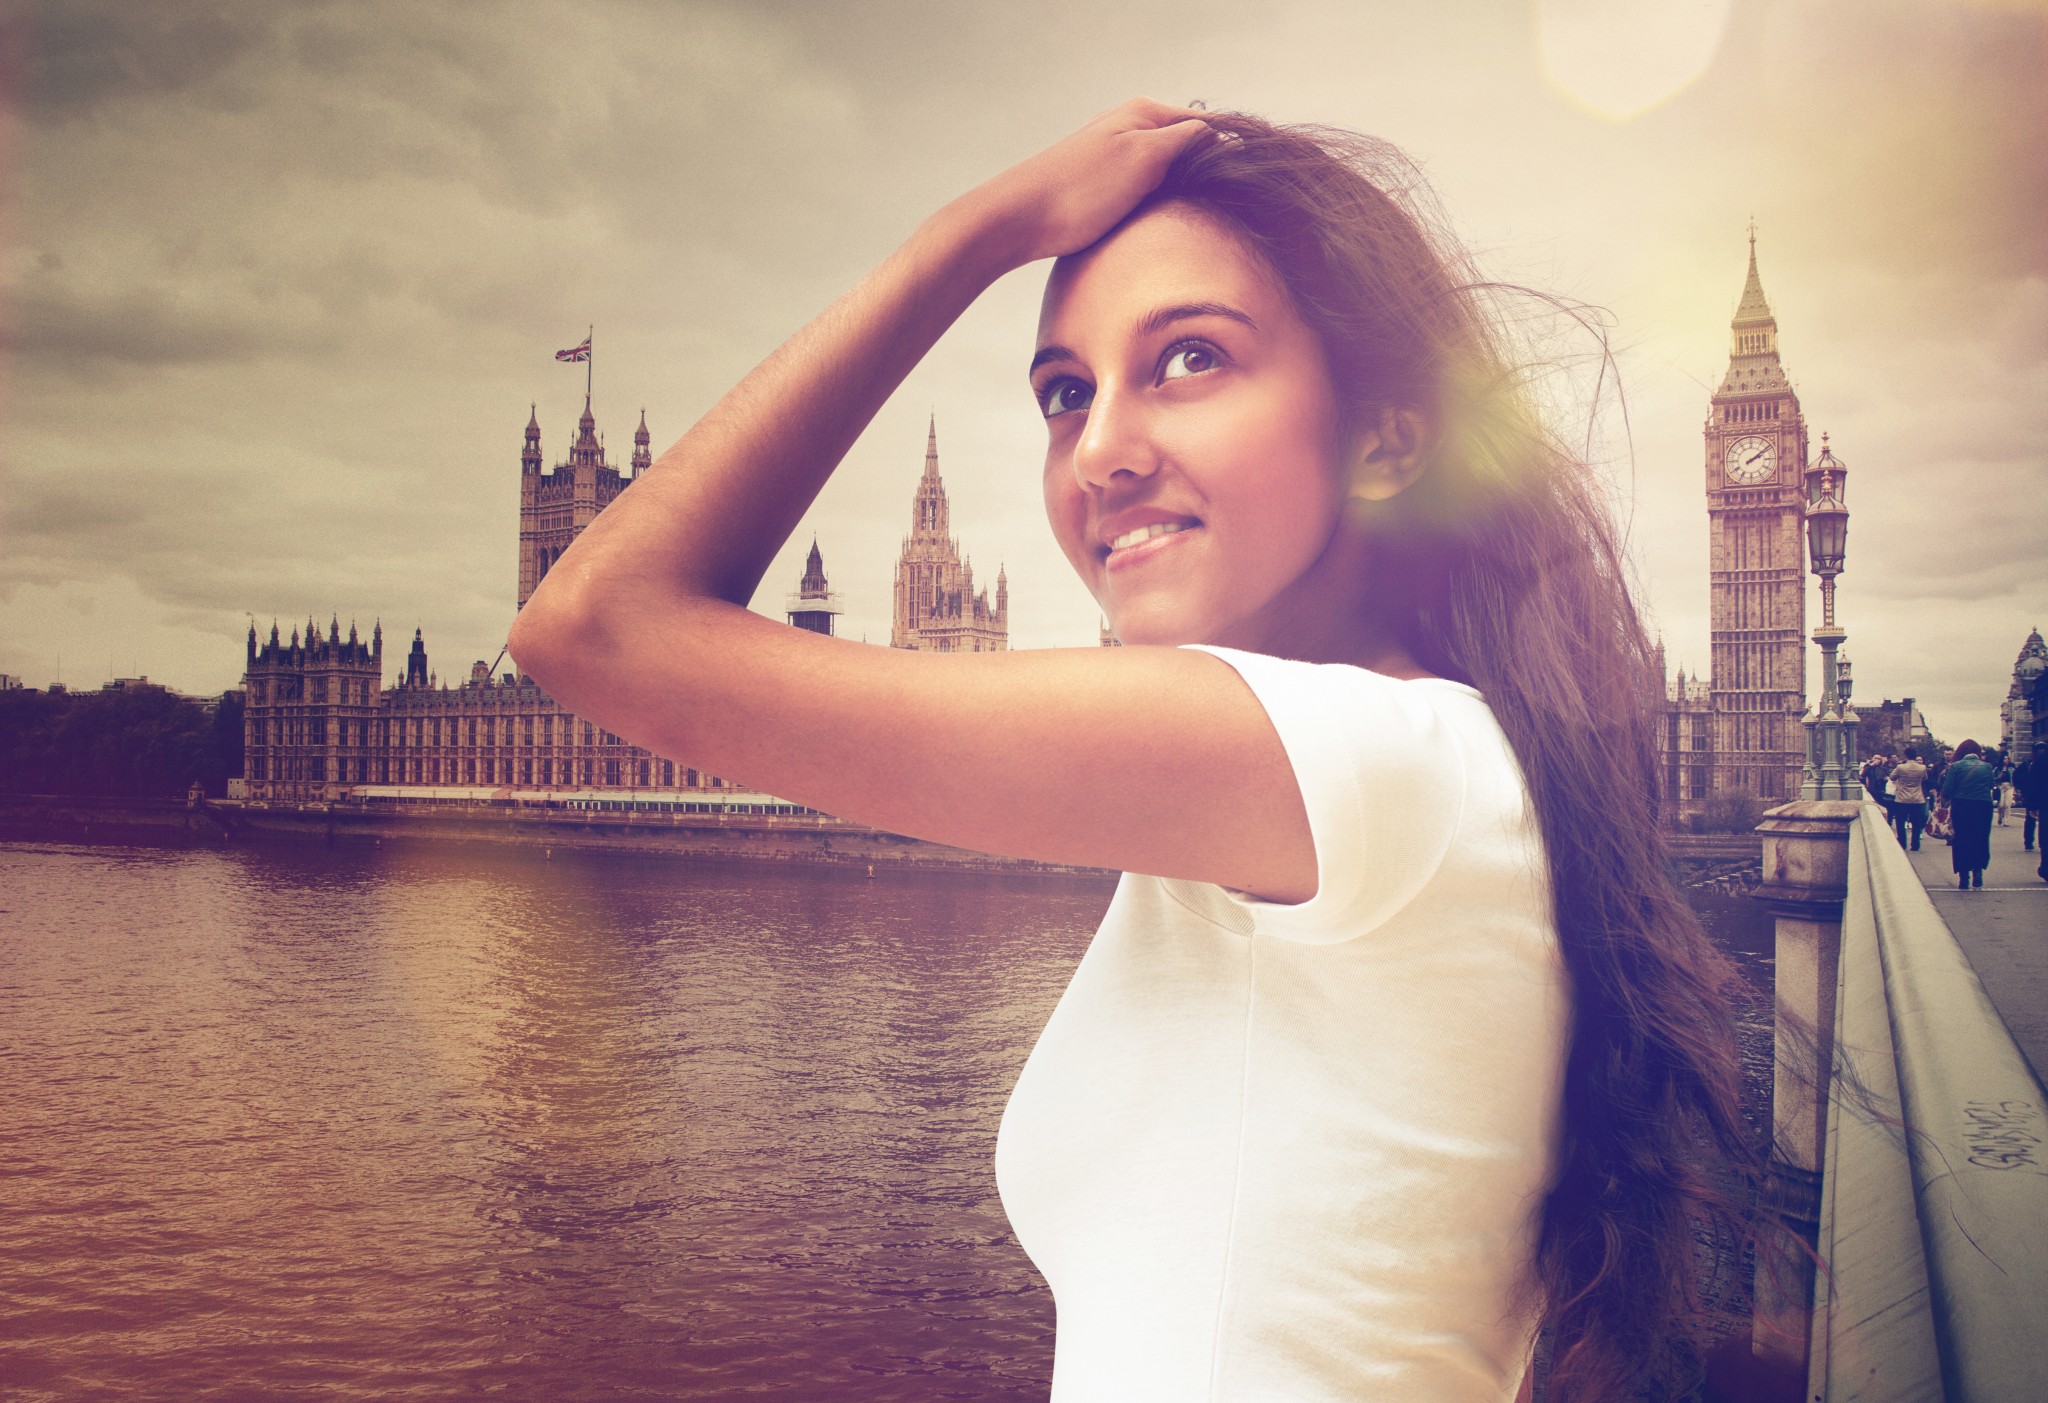 21 Signs You are an International Student Who Went to University in England